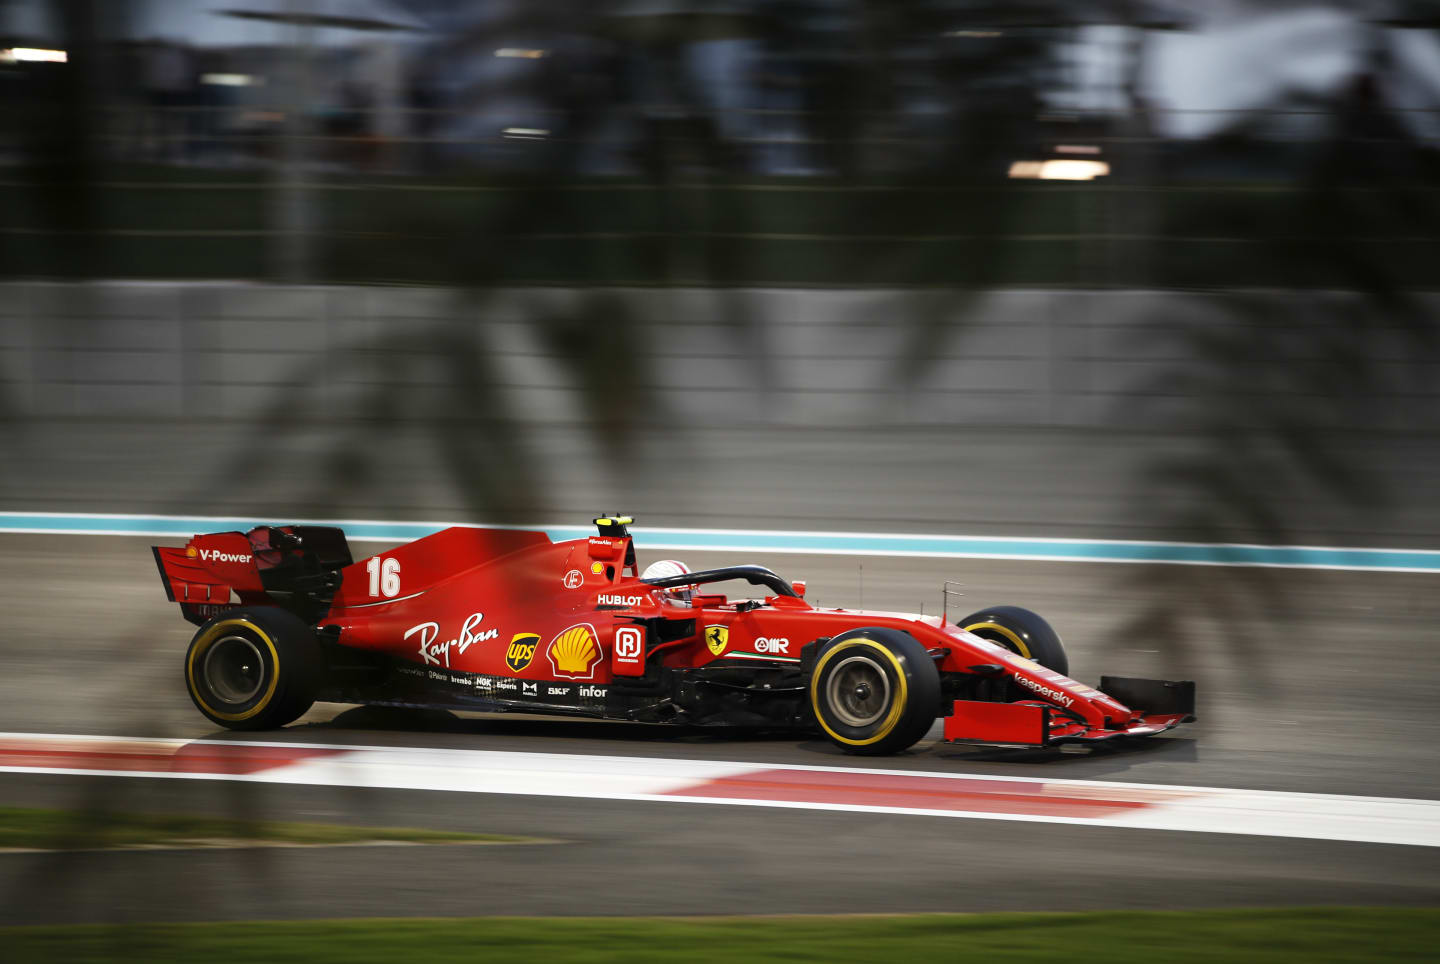 ABU DHABI, UNITED ARAB EMIRATES - DECEMBER 13: Charles Leclerc of Monaco driving the (16) Scuderia Ferrari SF1000 during the F1 Grand Prix of Abu Dhabi at Yas Marina Circuit on December 13, 2020 in Abu Dhabi, United Arab Emirates. (Photo by Hamad I Mohammed - Pool/Getty Images)